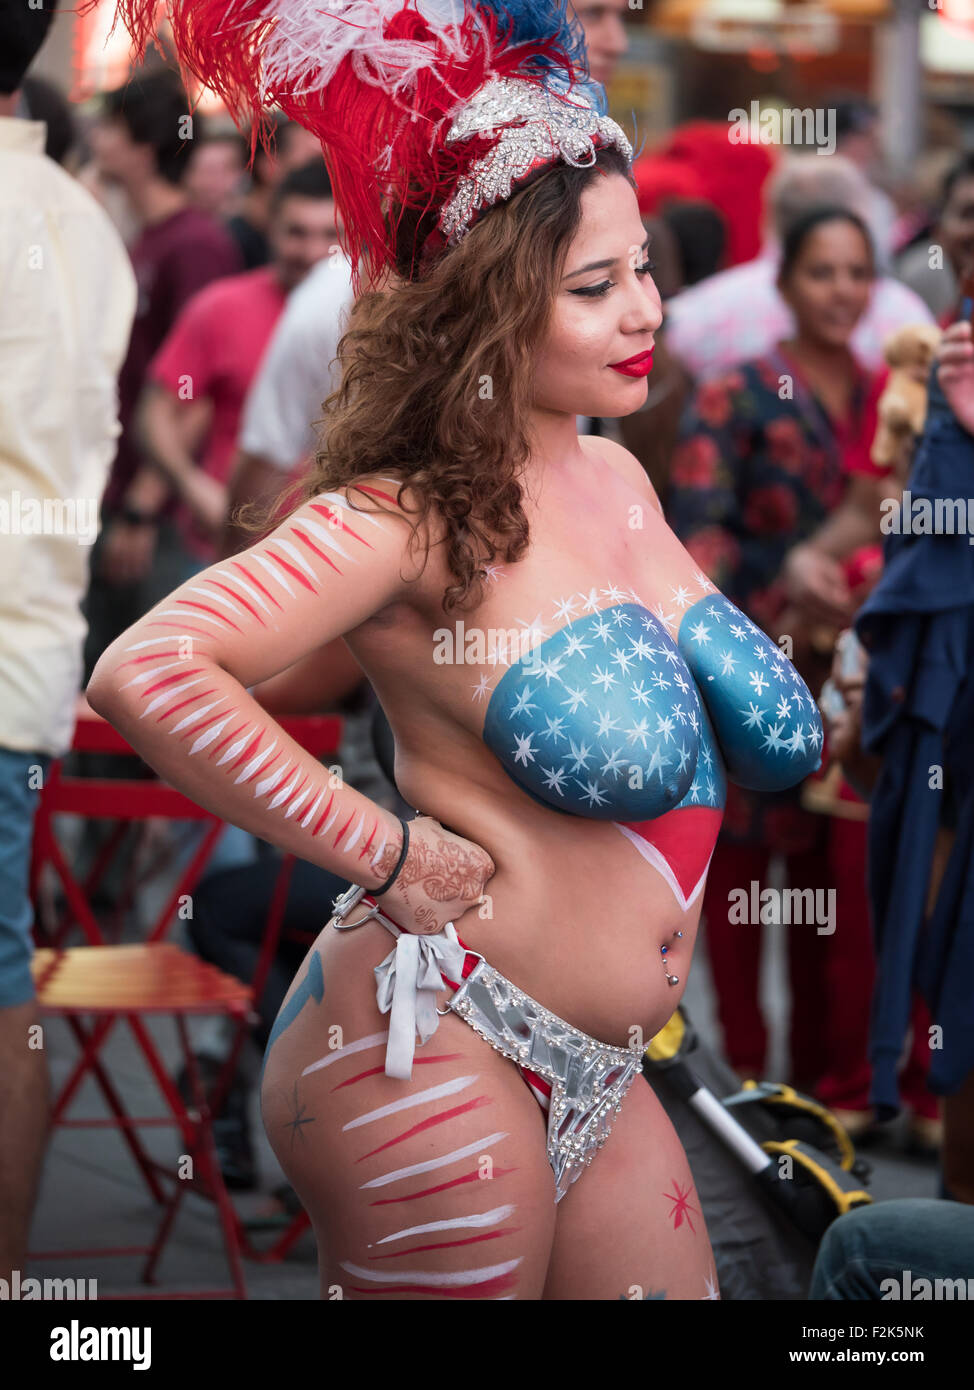 Lourdes Carrasquillo, a topless body-painted Desnuda, poses for an artist  in Times Square in New York City Stock Photo - Alamy